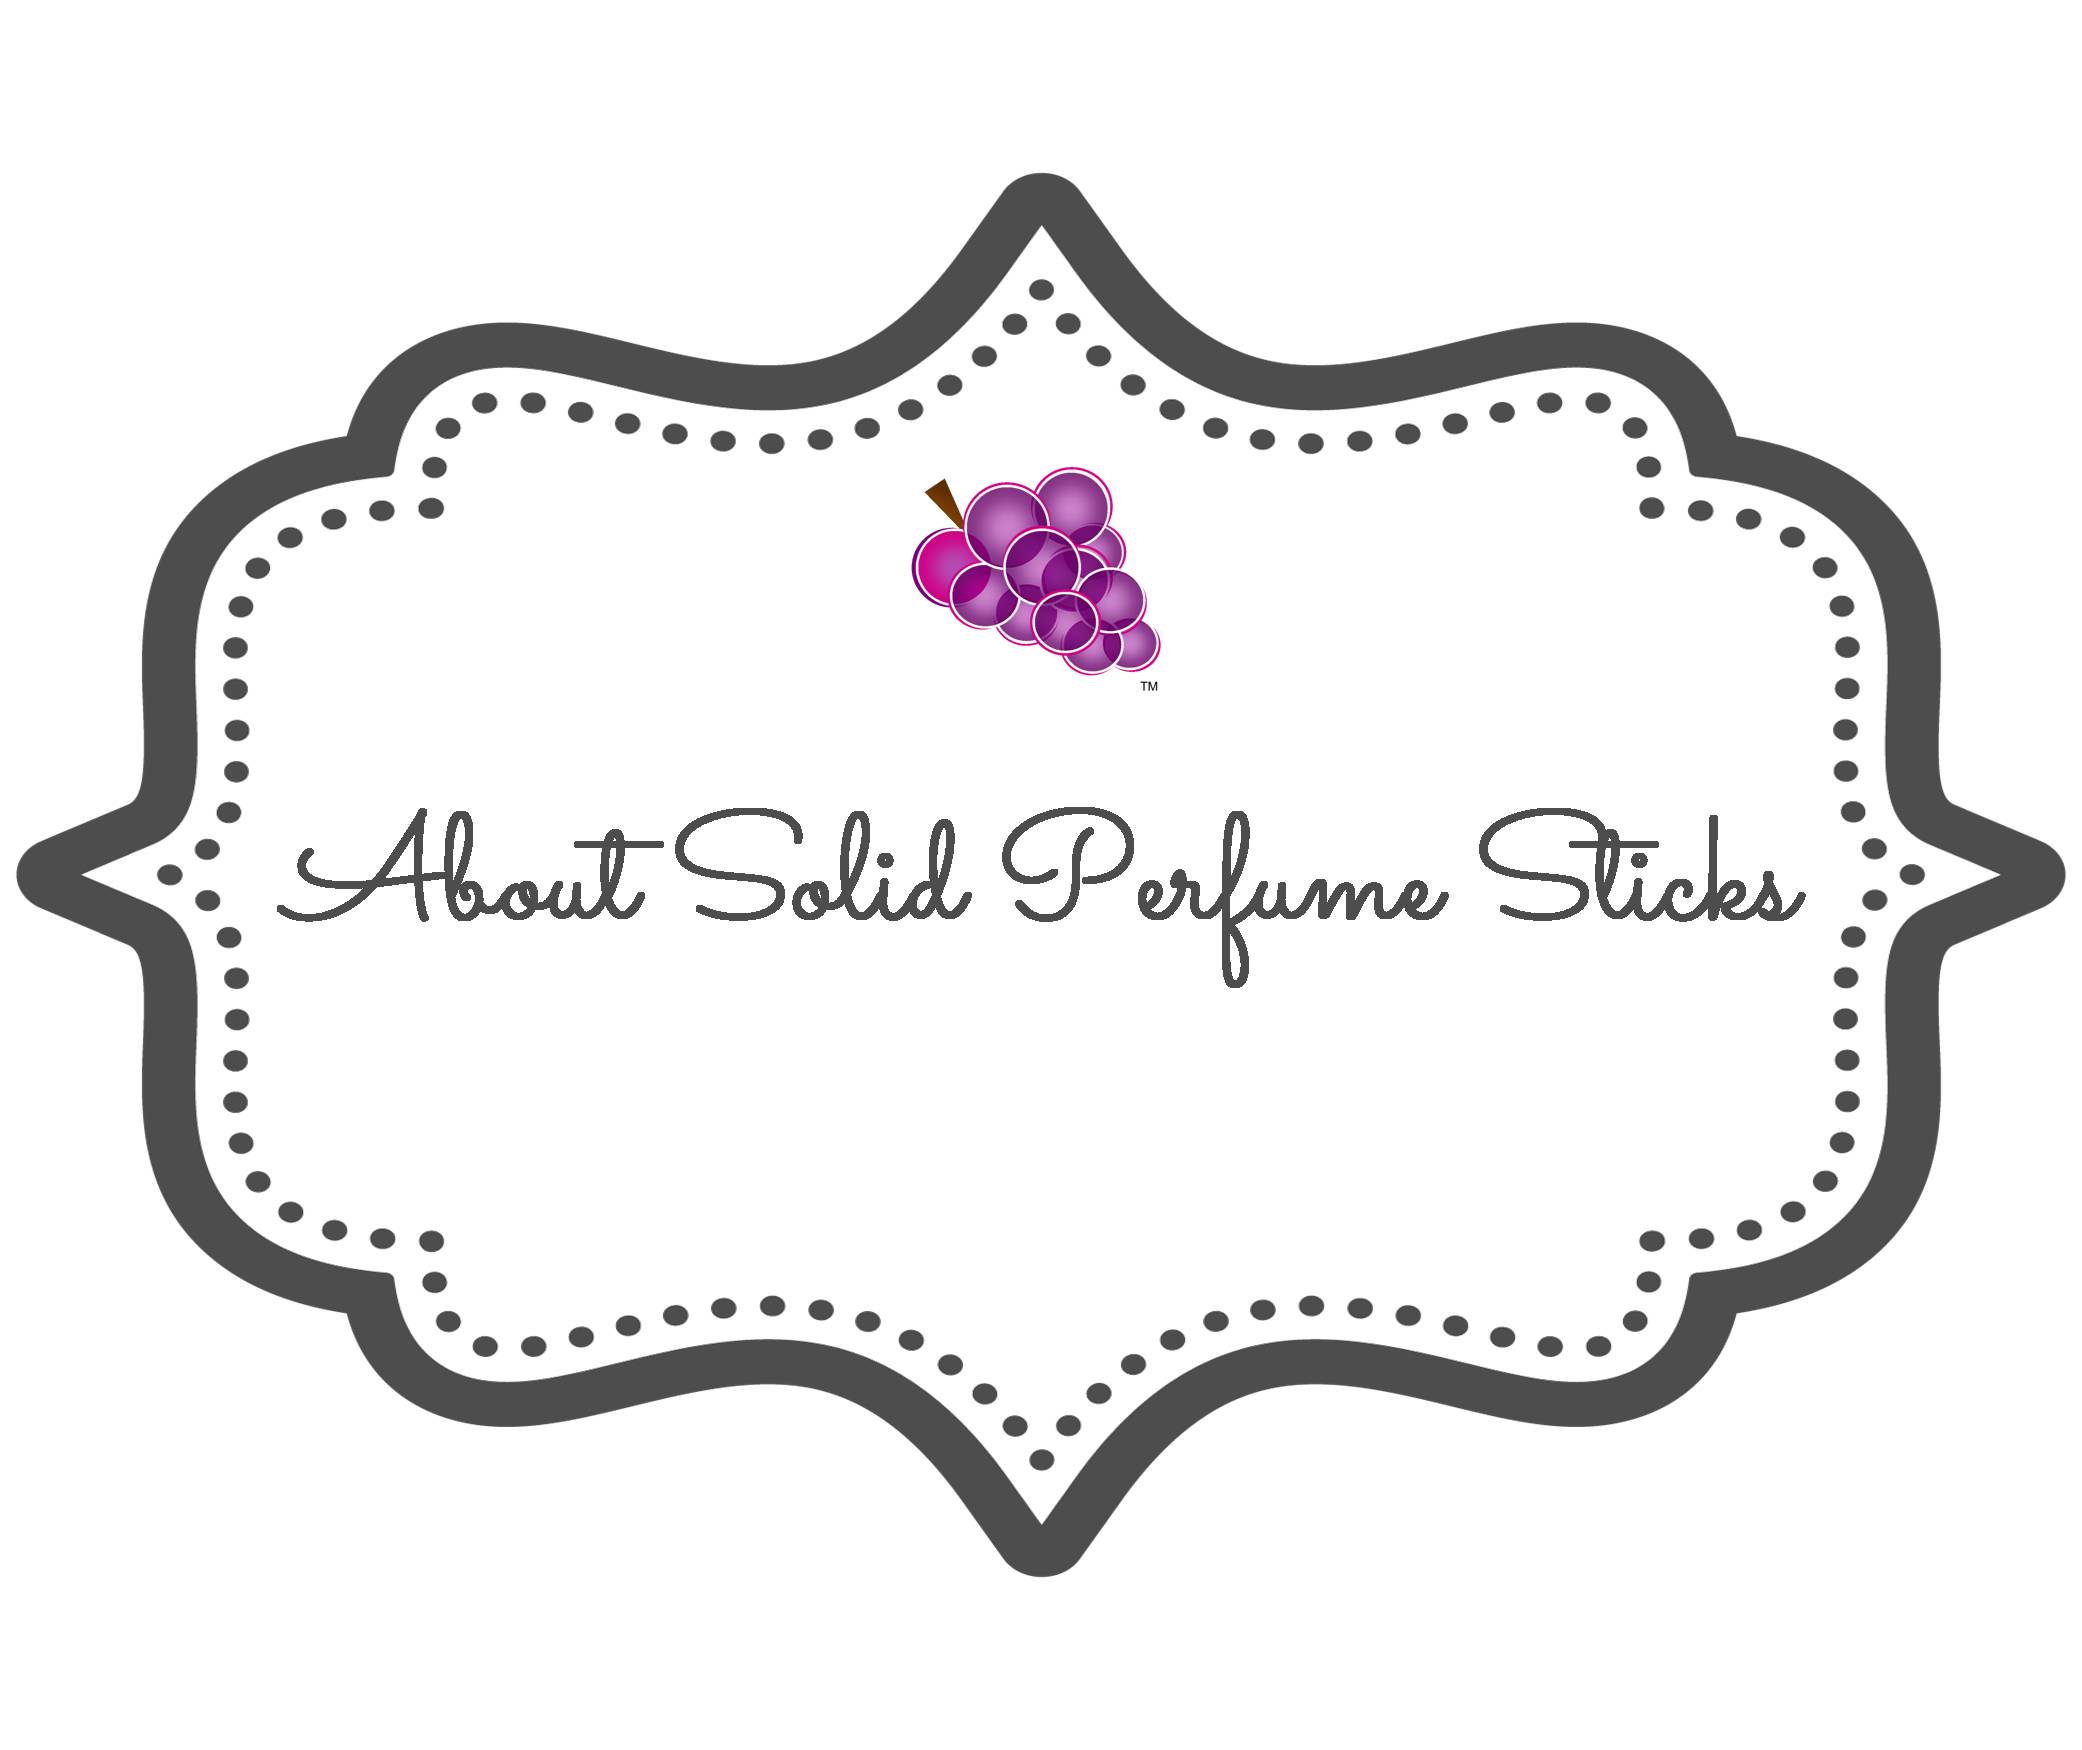 about-solid-perfume-sticks.jpg